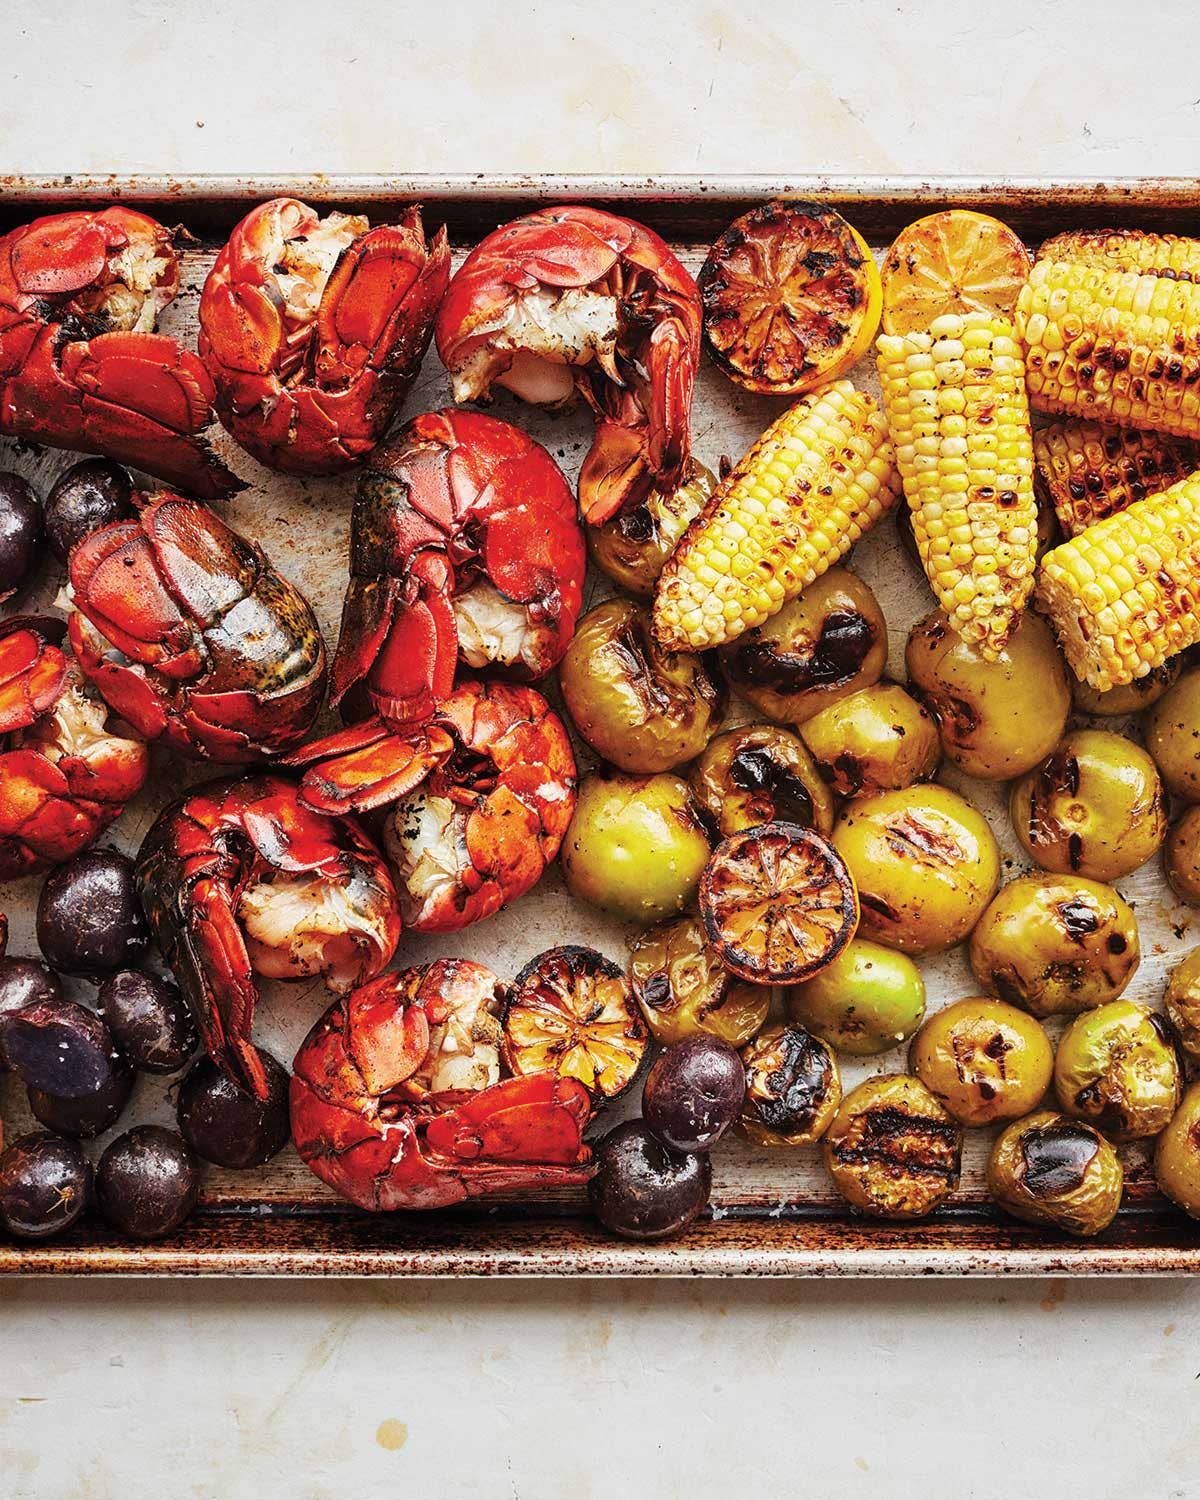 (Re)Consider the Lobster: How to Grill the World’s Most Regal Crustacean